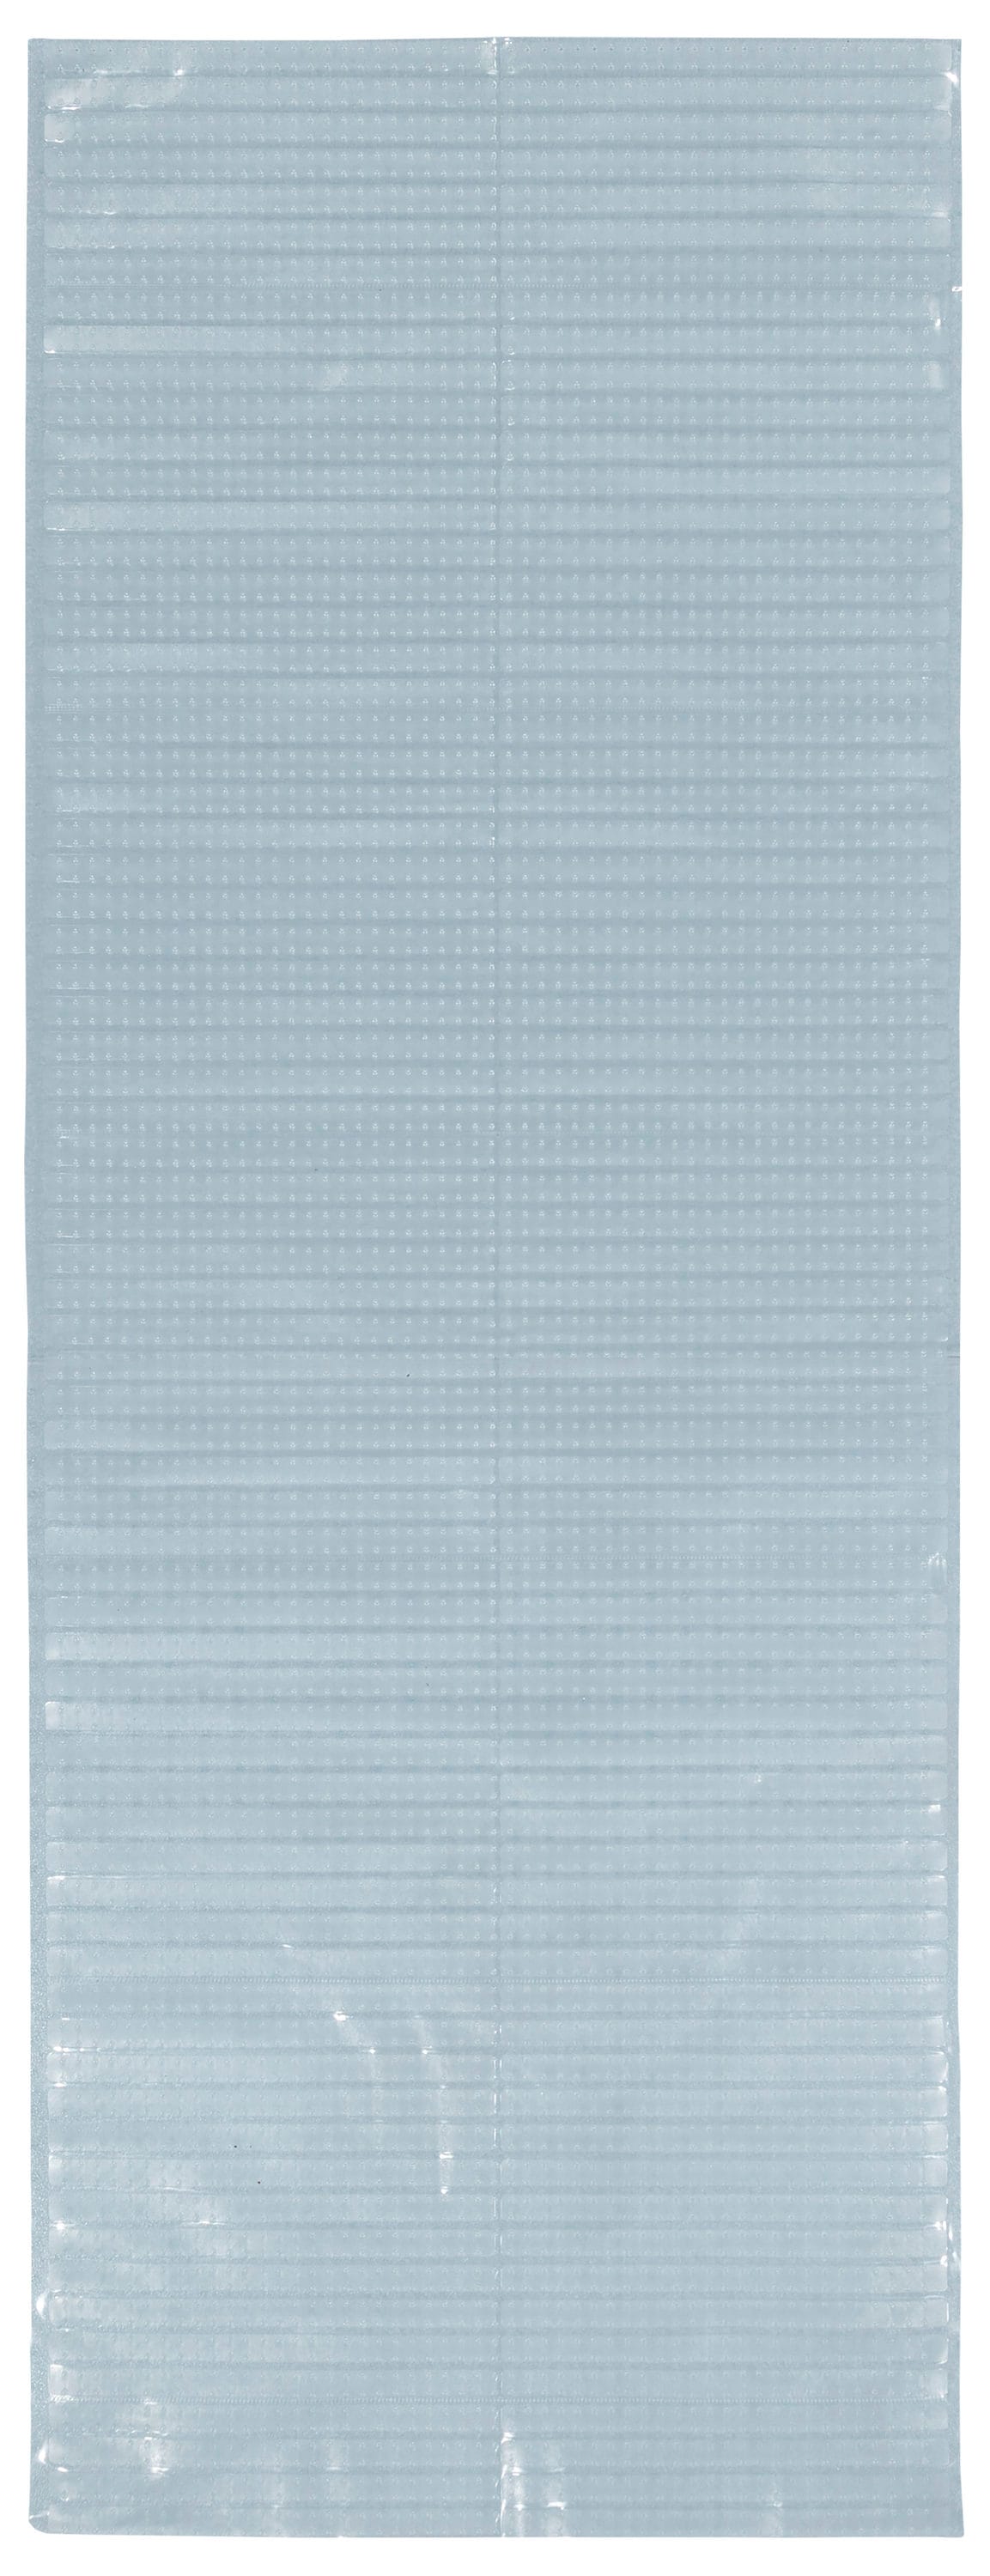 Clear Rugs at Lowes.com